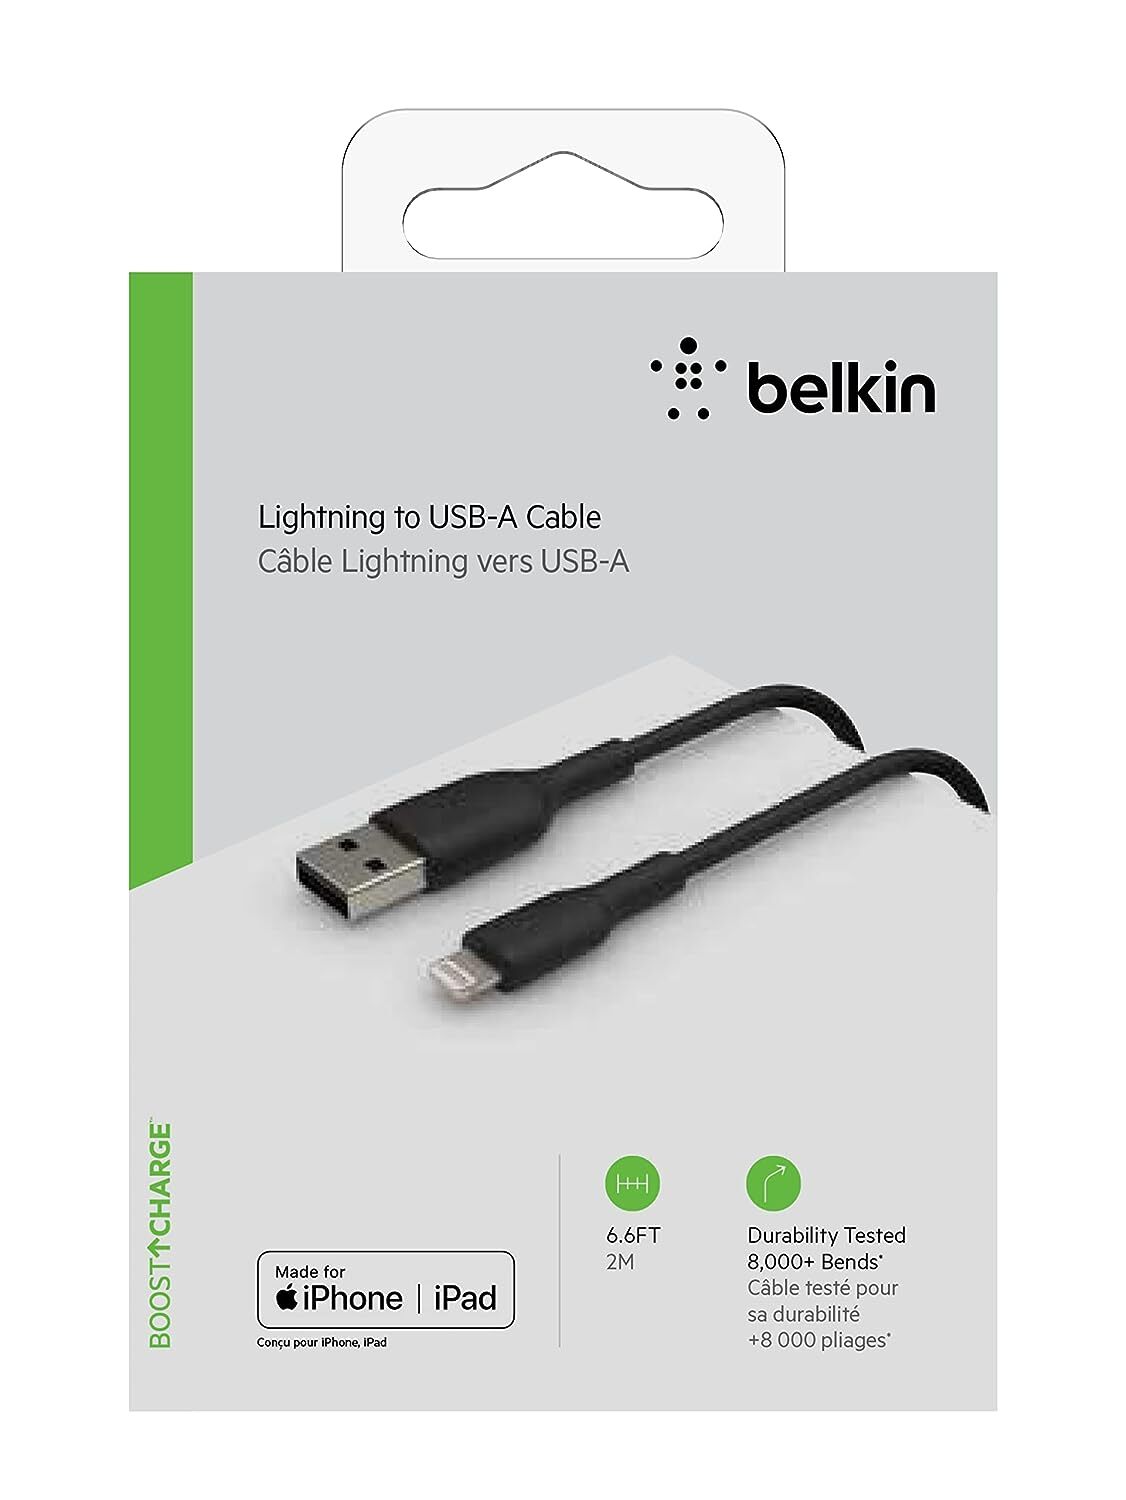 Belkin Apple Certified Lightning to USB A and Sync Cable for iPhone, iPad, Air Pods, 6.6 feet (2 meters) – Black